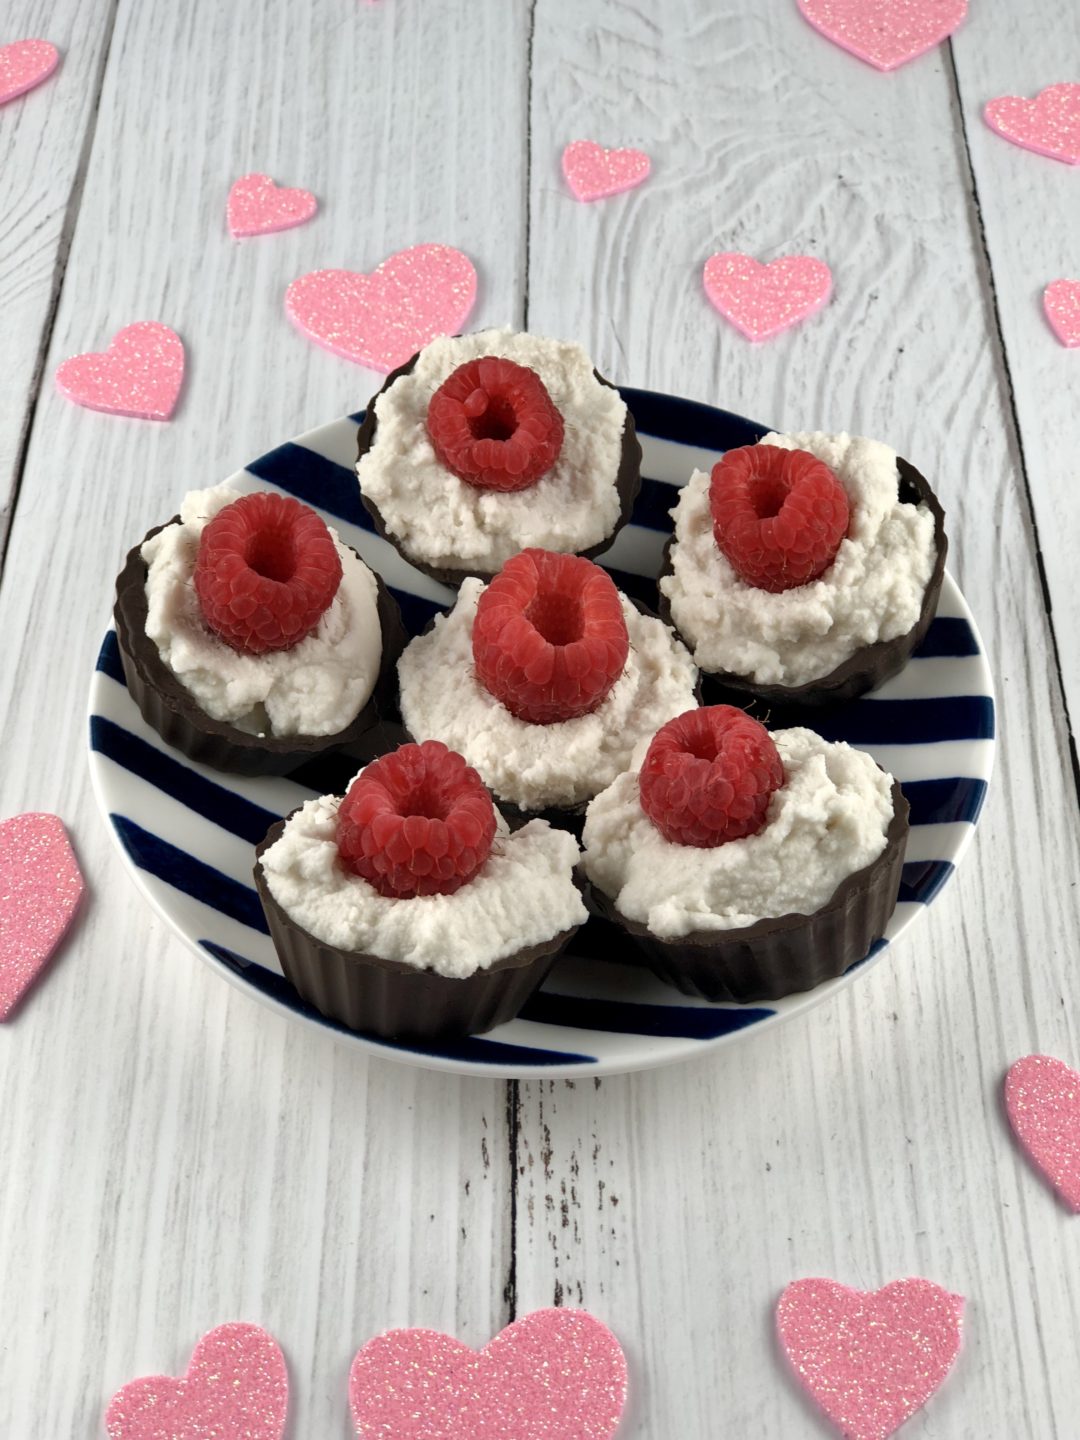 FODMAP safe foods - Coconut Whipped Cream Chocolate Cups